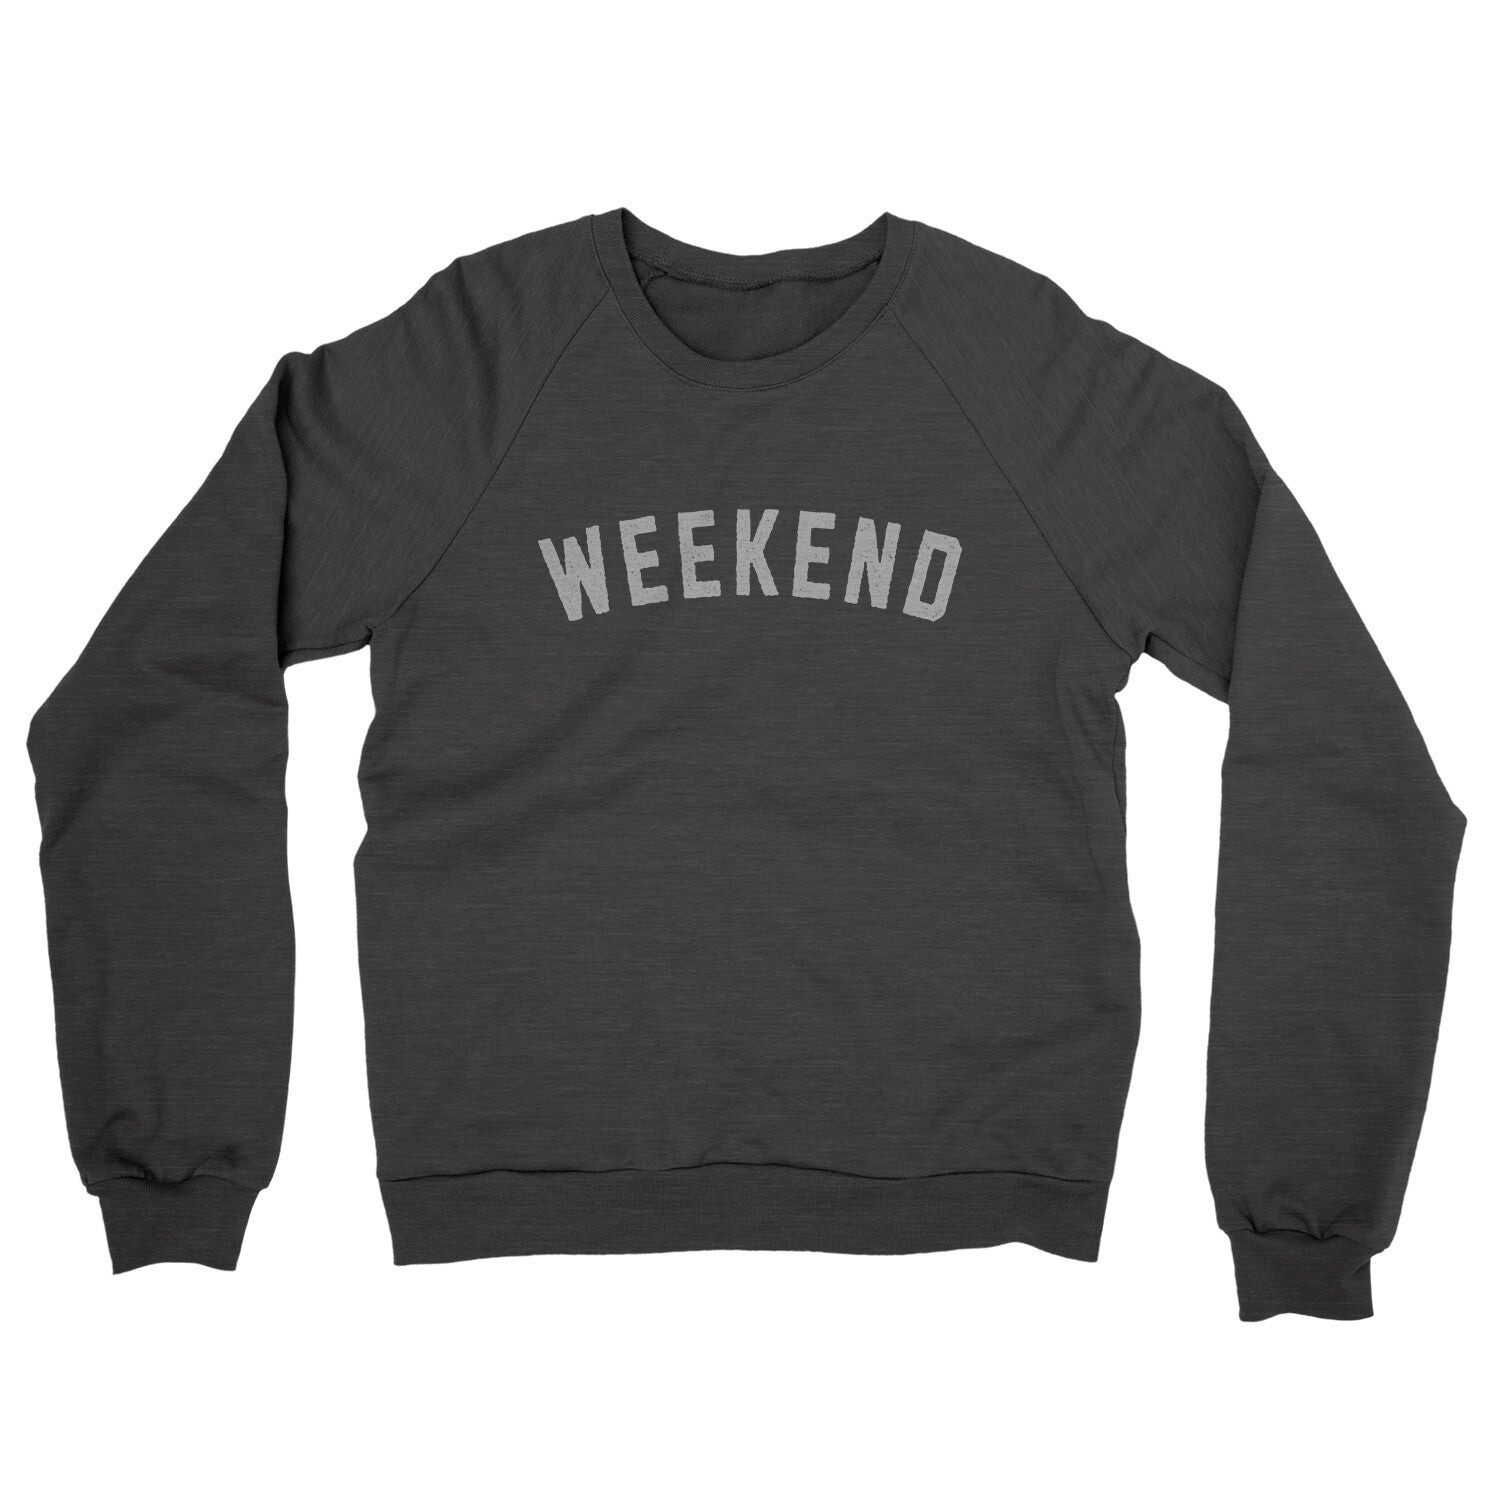 Weekend in Charcoal Heather Color